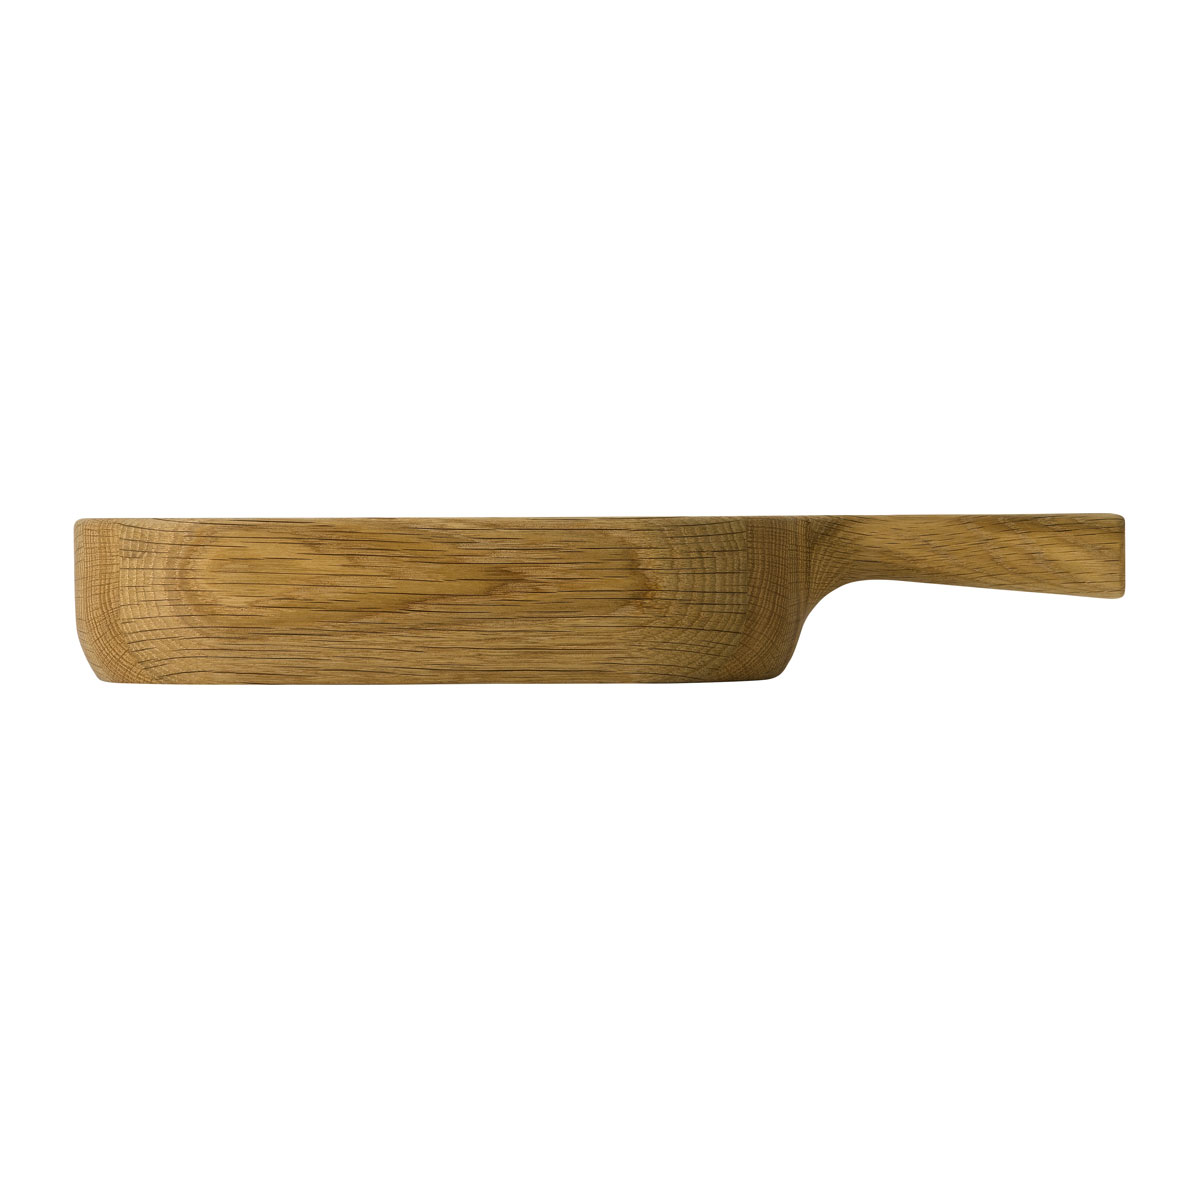 Royal Doulton Barber and Osgerby Olio Wood Handled Server